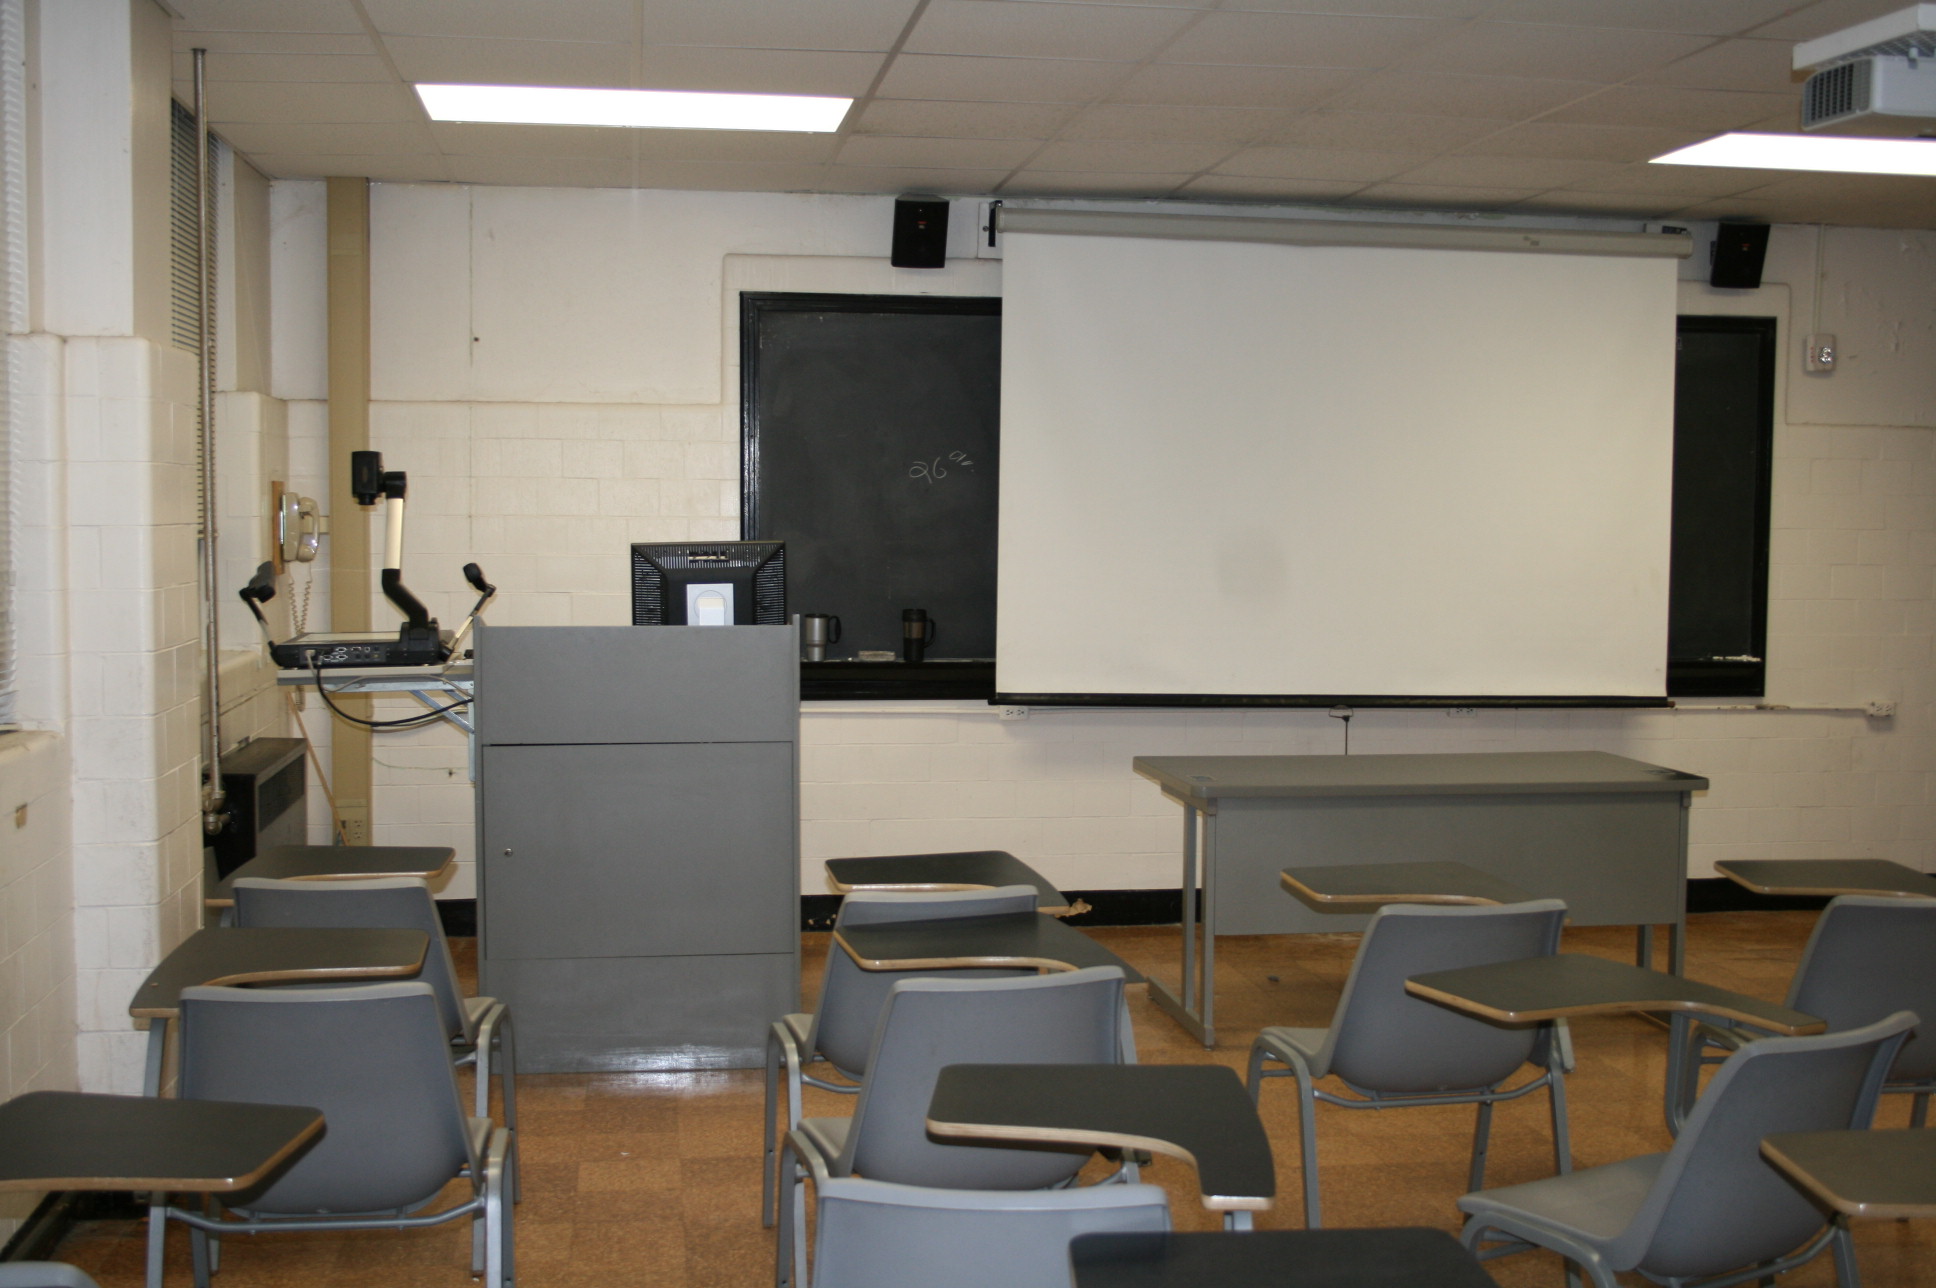 francioni 12, view from back, showing projector screen.